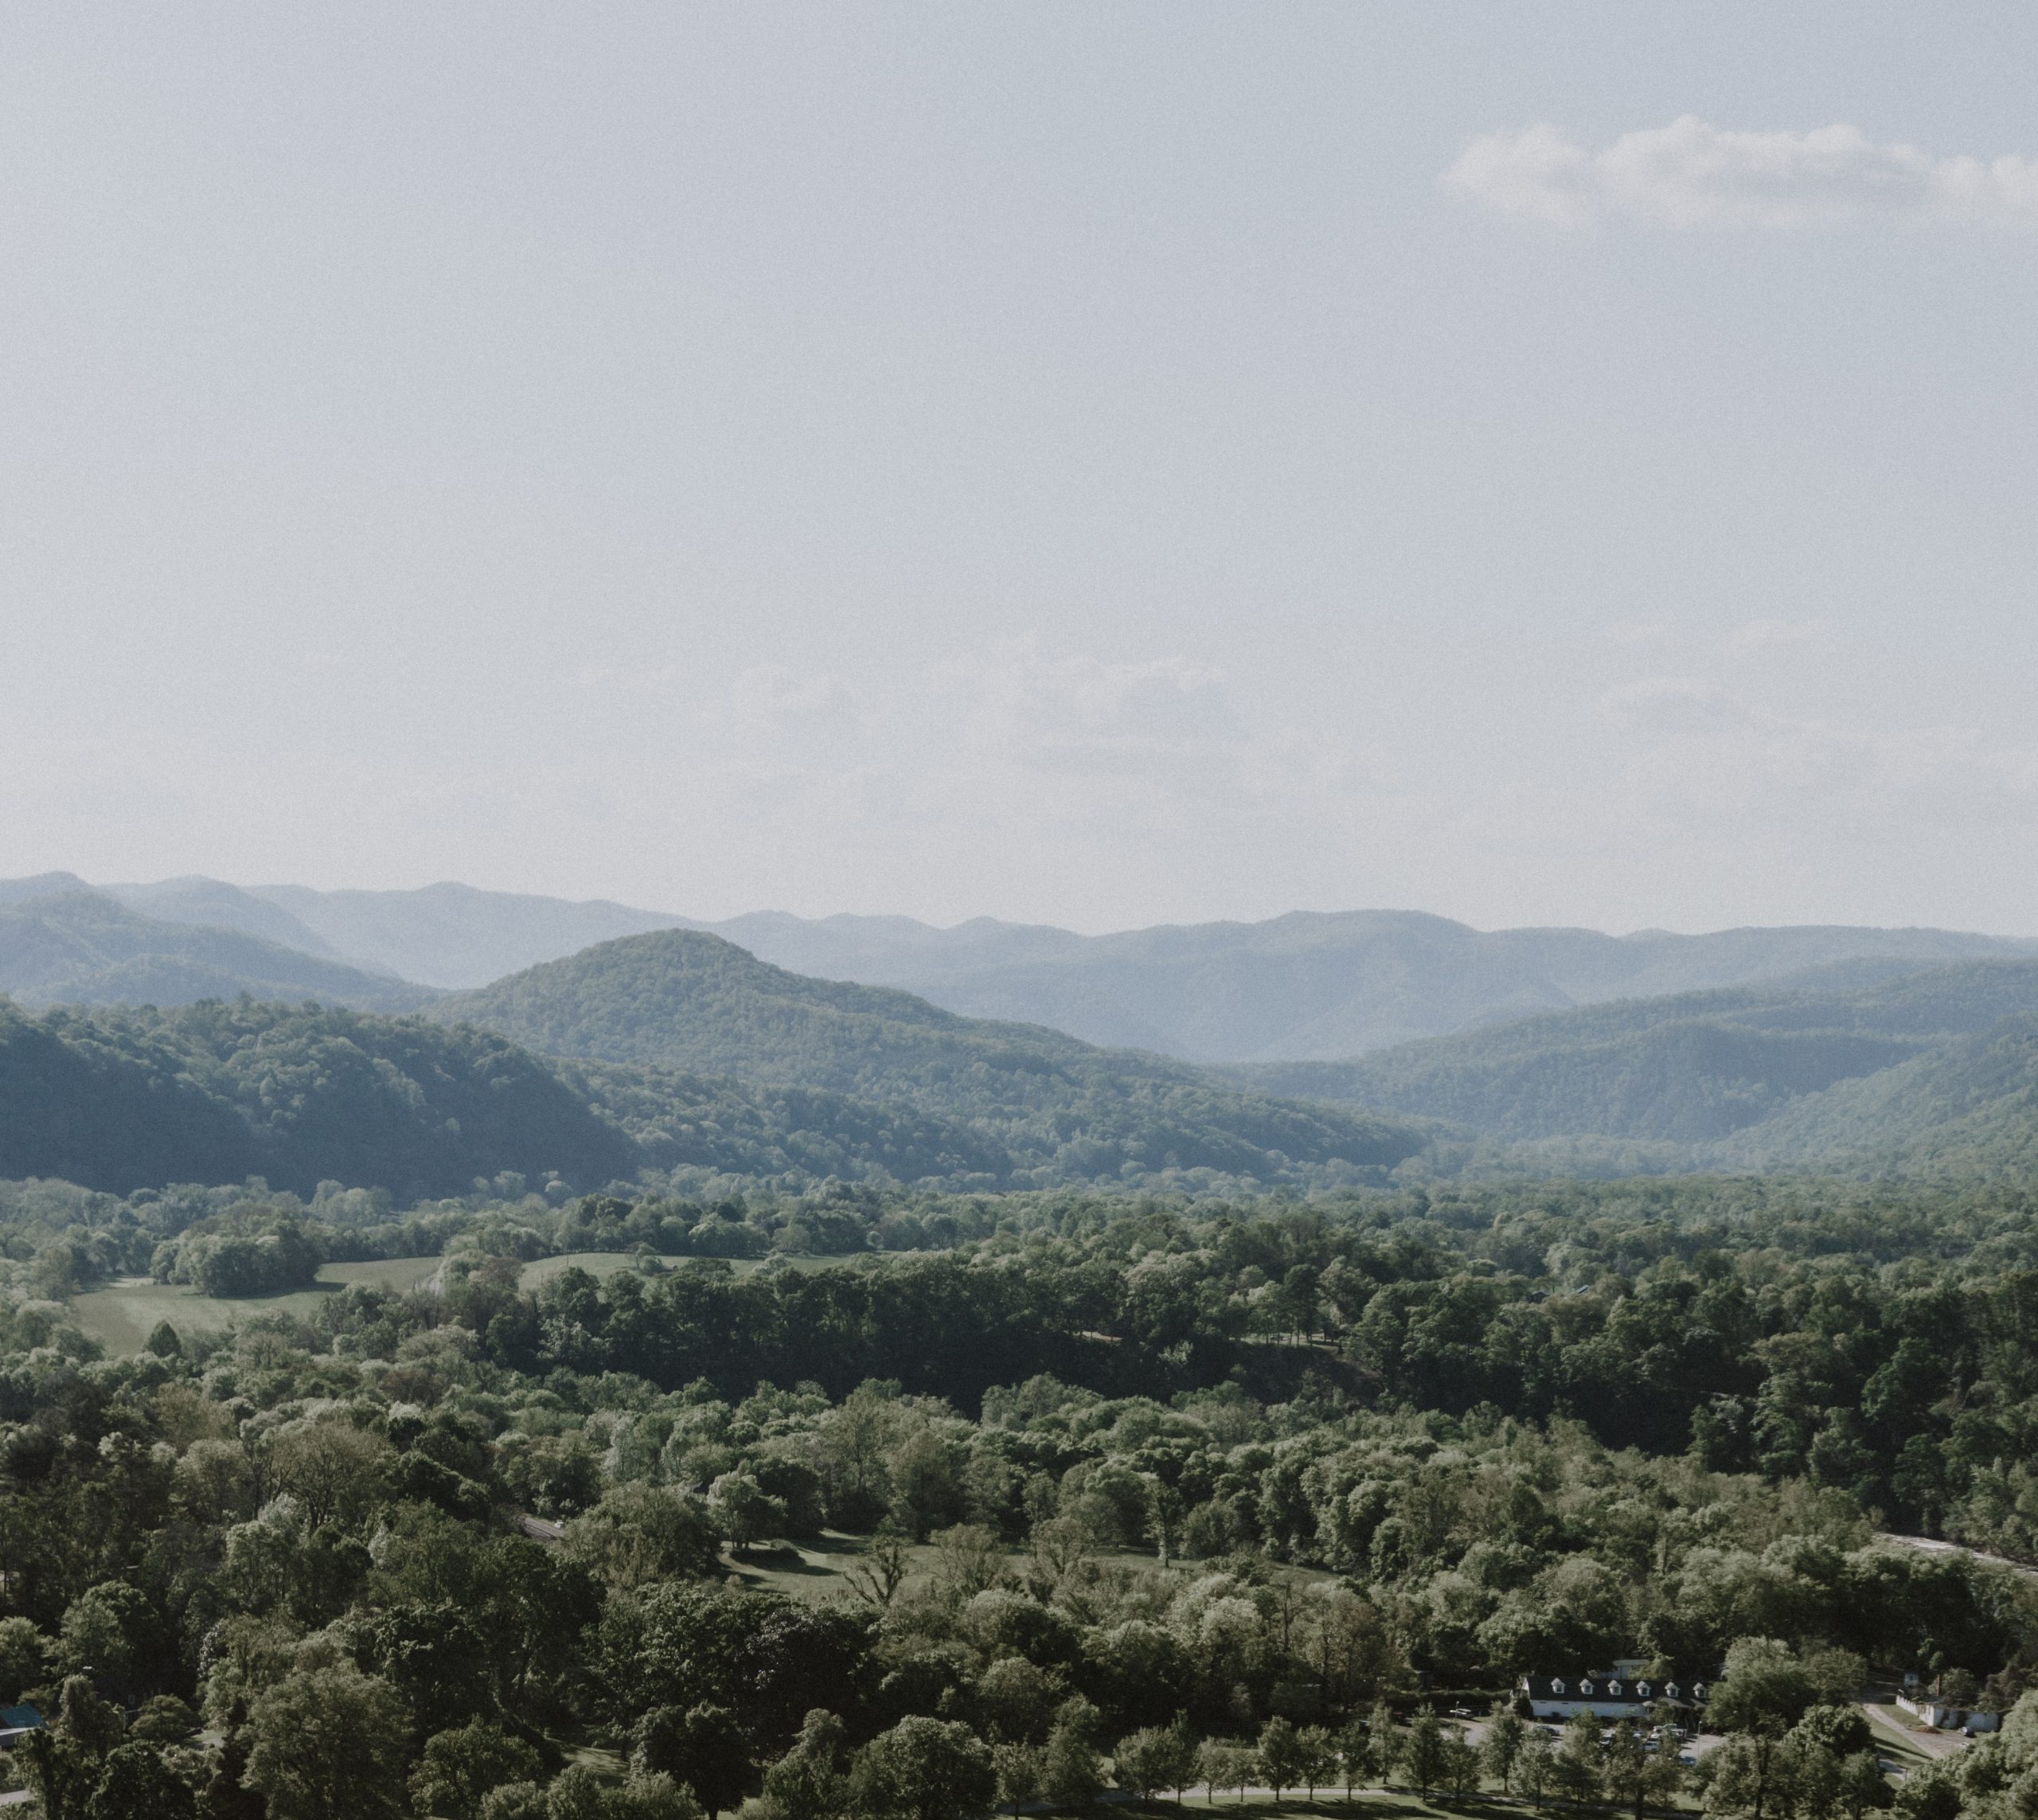 This Month in ReImagine Appalachia: July 27, 2021